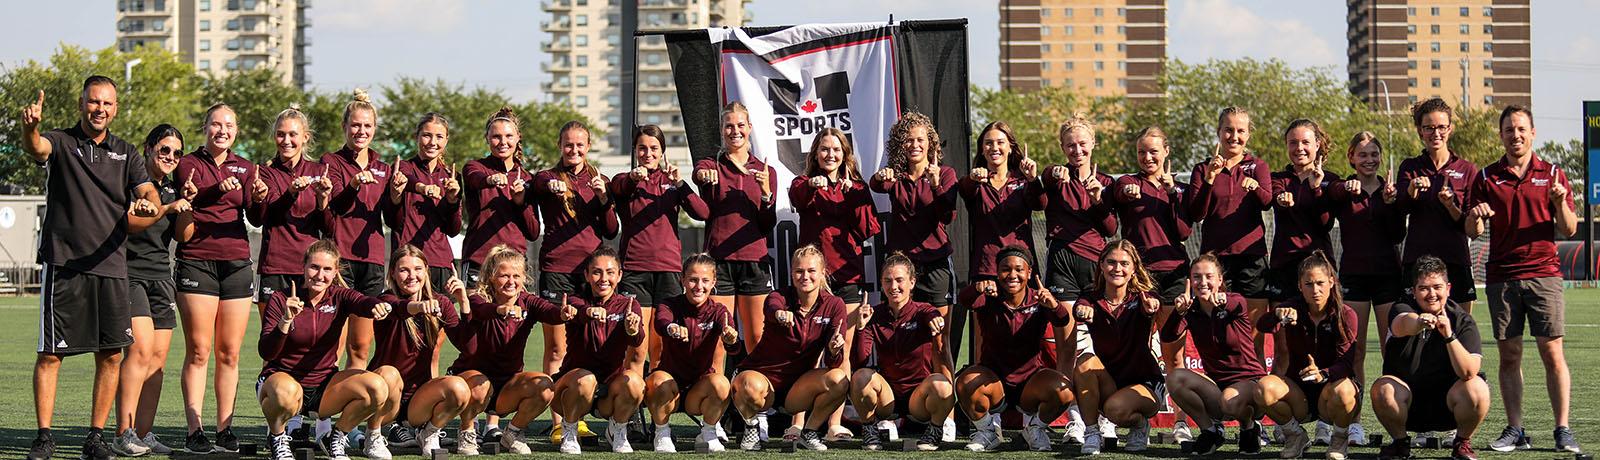 The players and coaches from the 2021 women's Grffins soccer team stand in a row. They are each holding out one hand to display their championships rings, and making a number one gesture with the other hand.